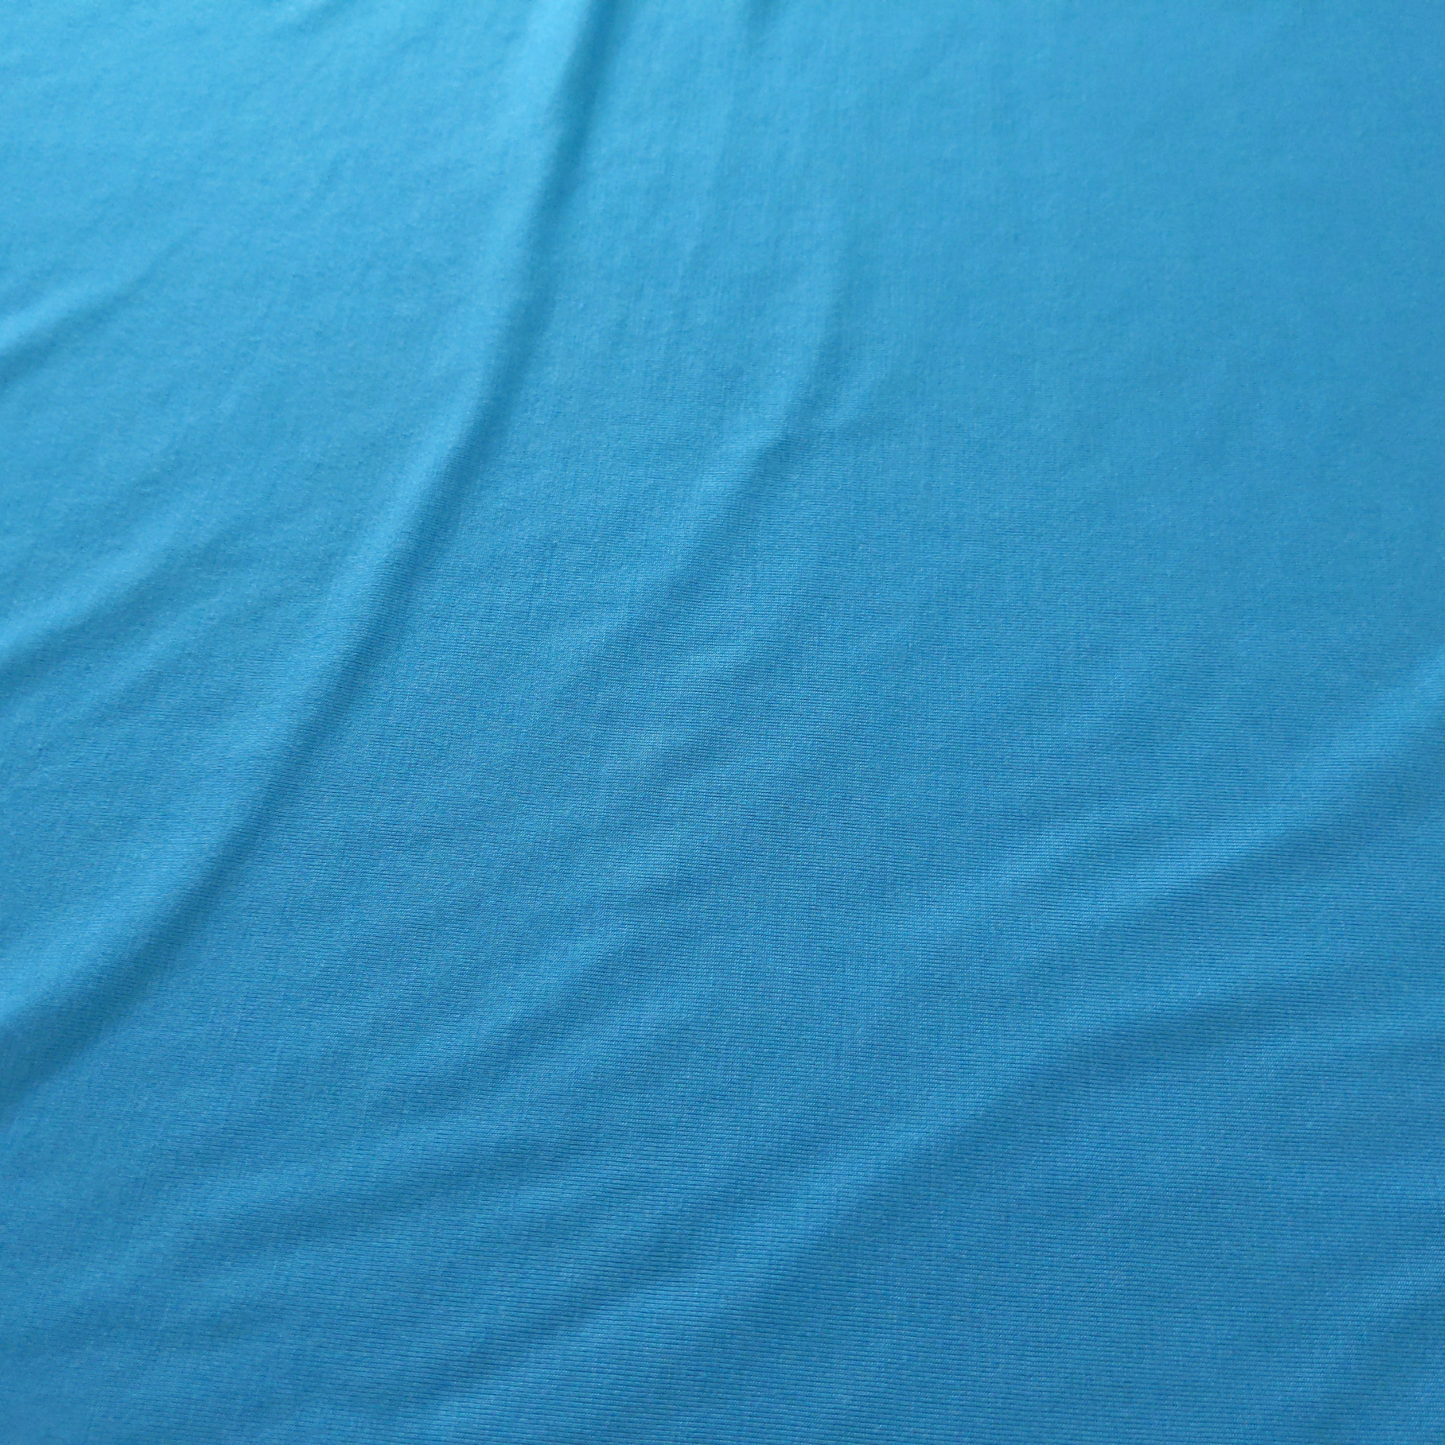 Viscose Jersey in Turquoise